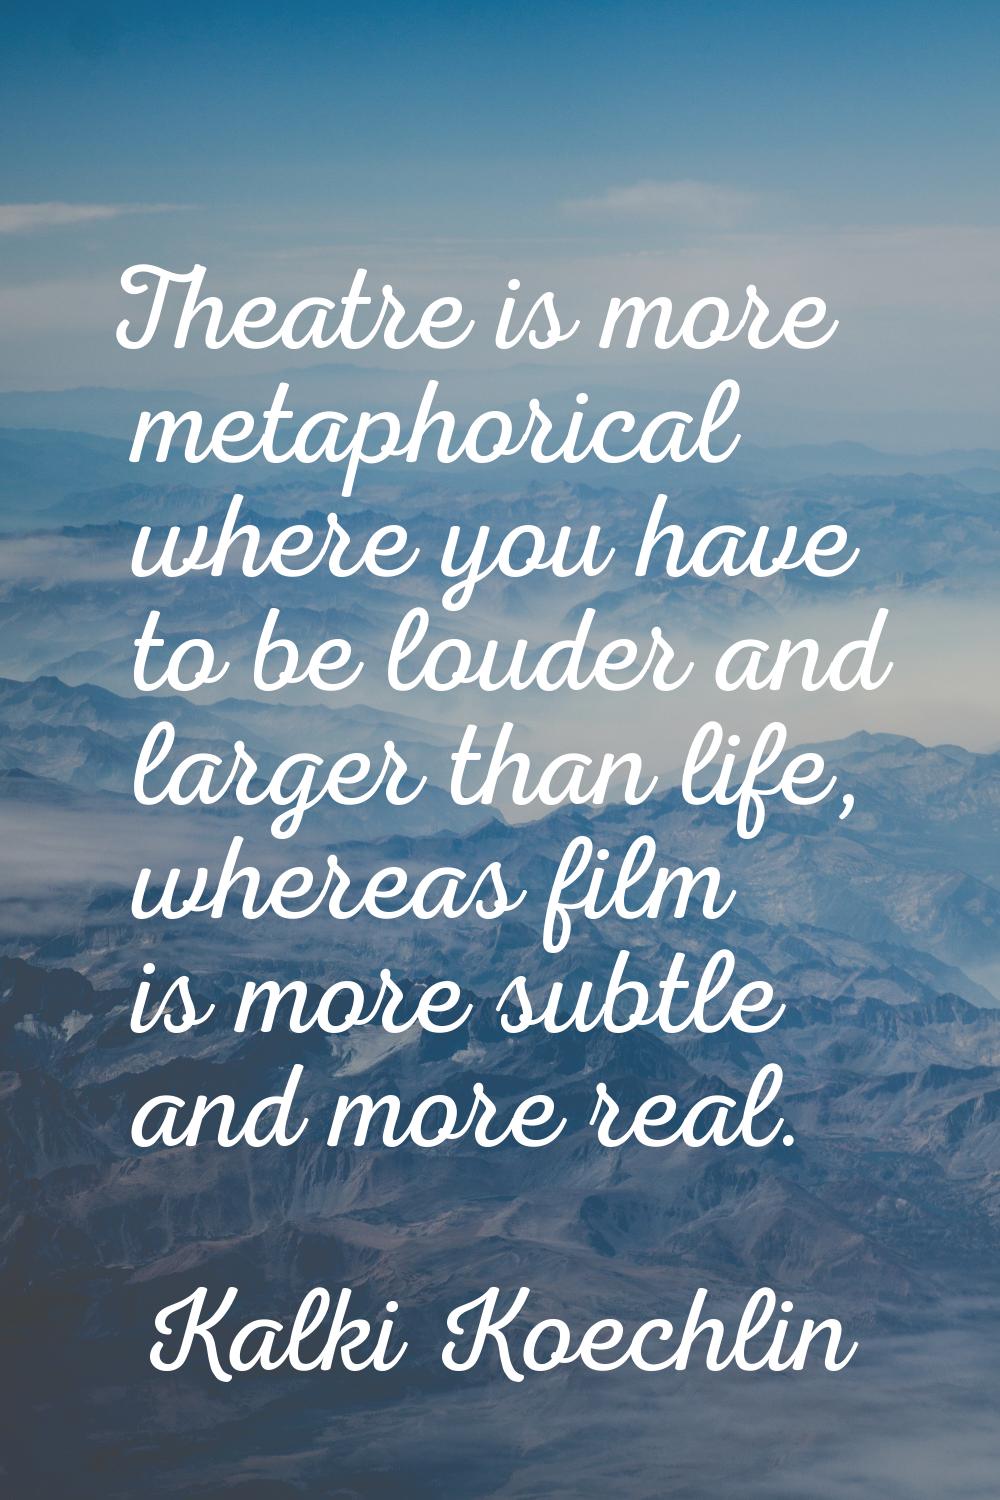 Theatre is more metaphorical where you have to be louder and larger than life, whereas film is more